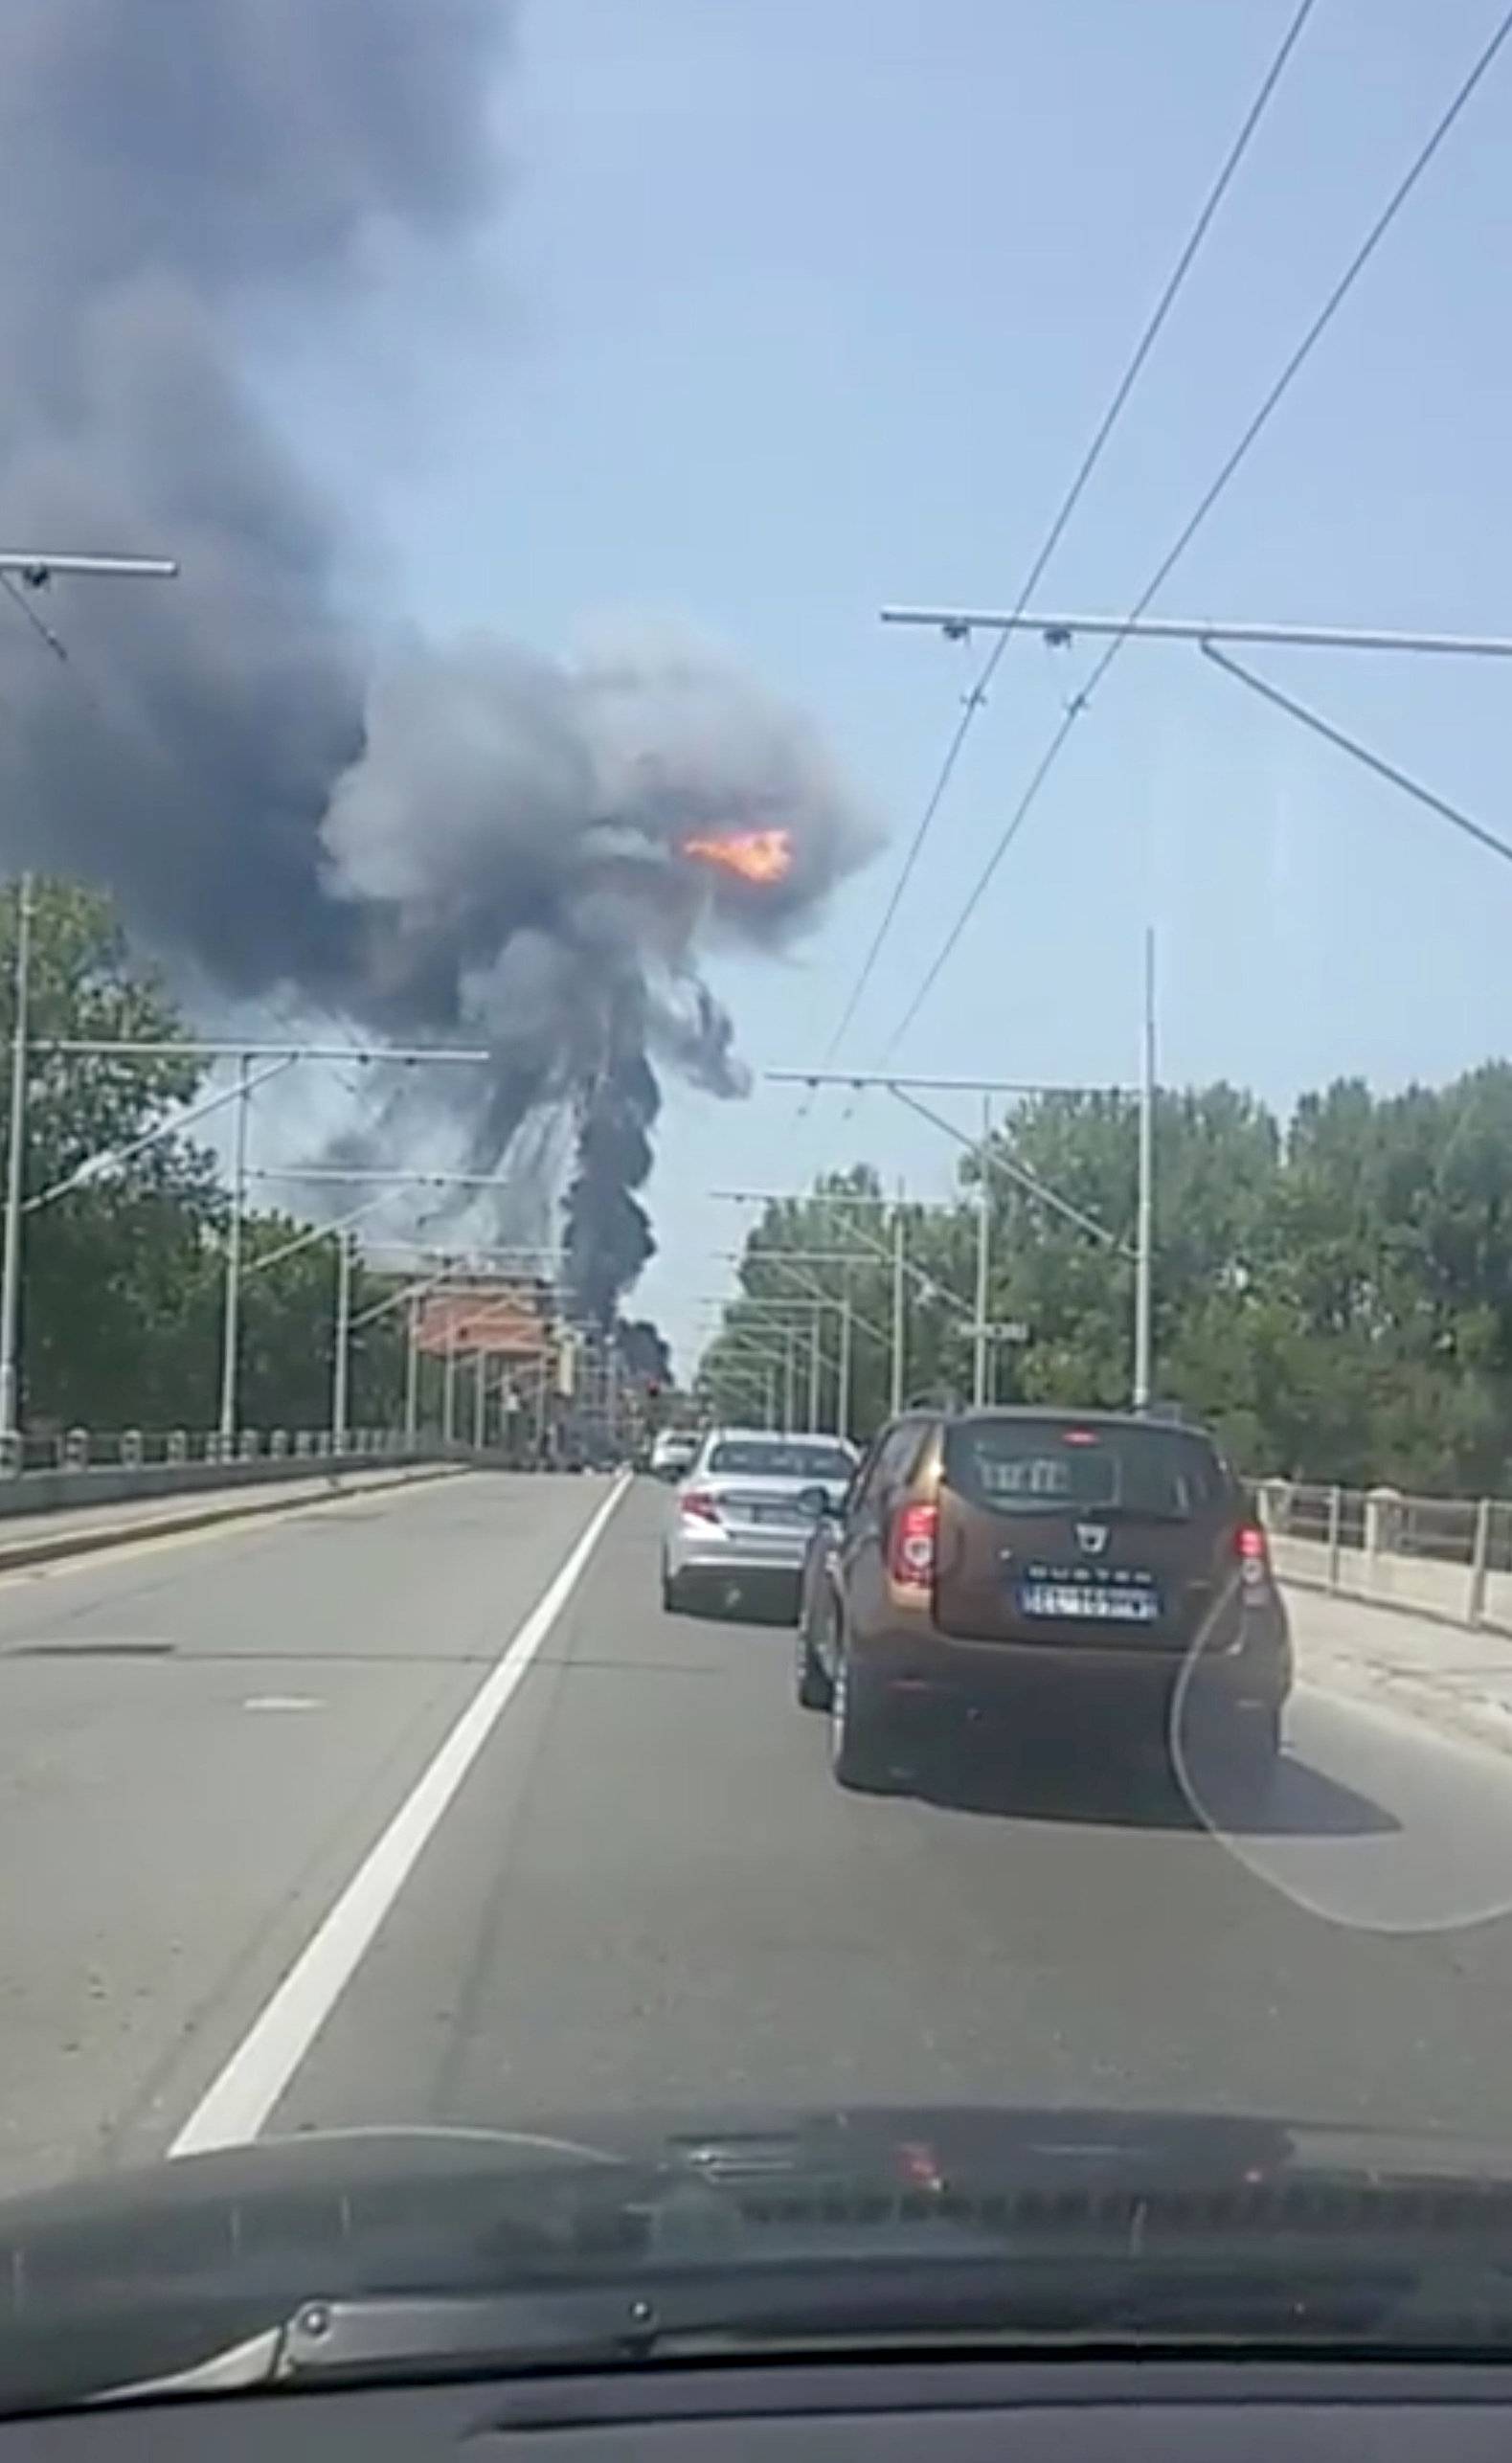 An explosion is seen at Borgo Panigale, on the outskirts of Bologna